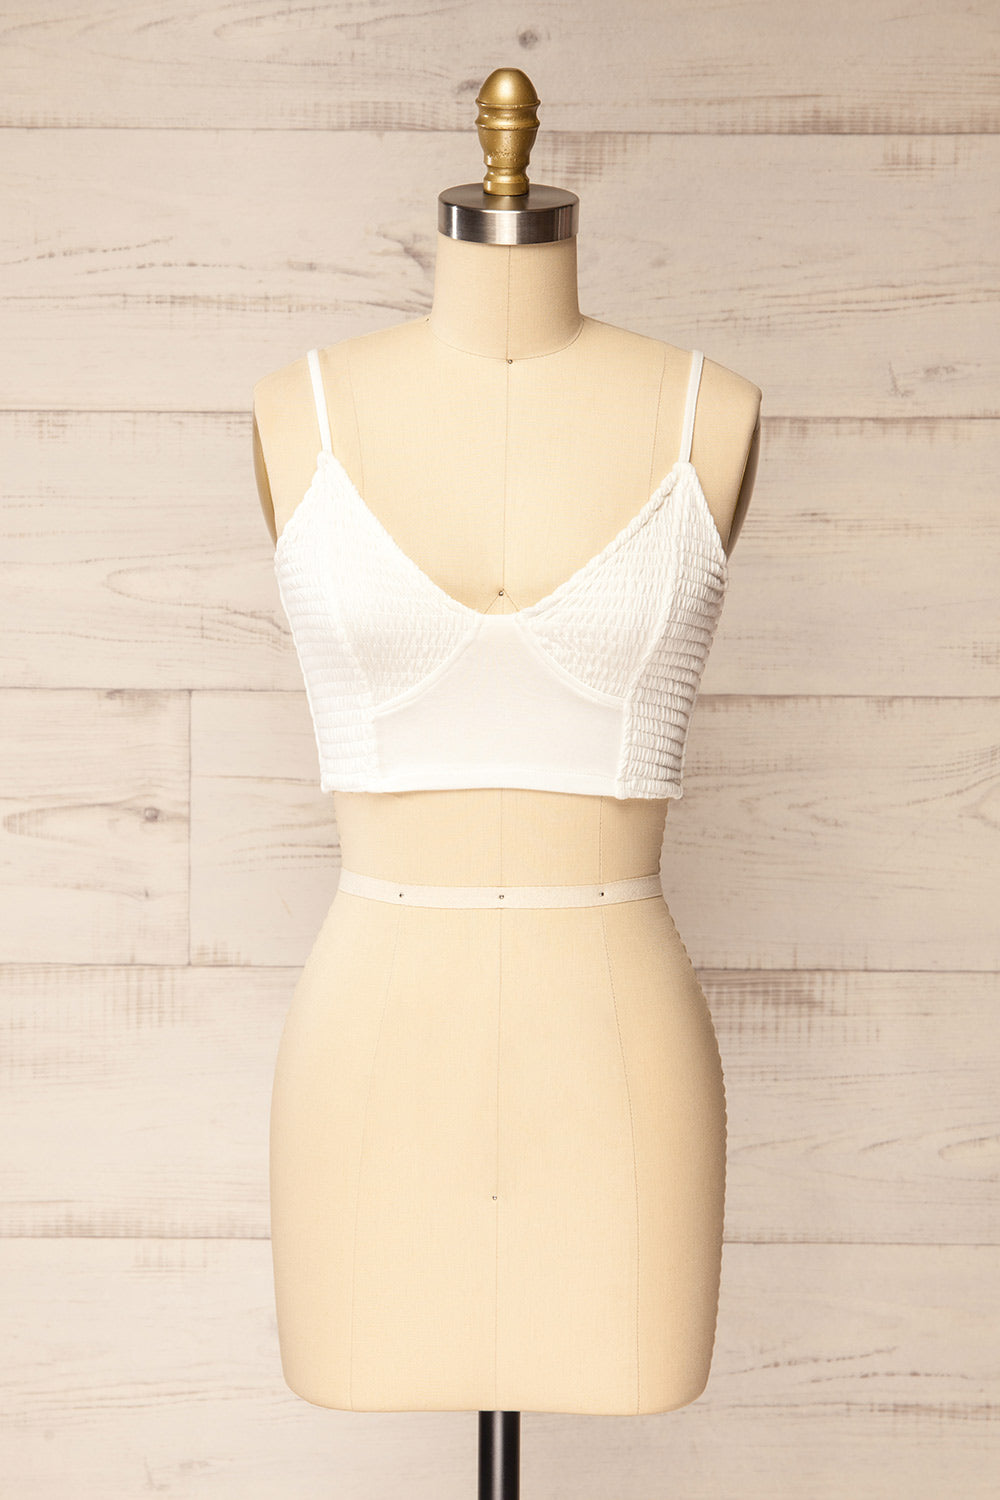 Lustleigh White Cropped Ruched Camisole | La petite garçonne front view